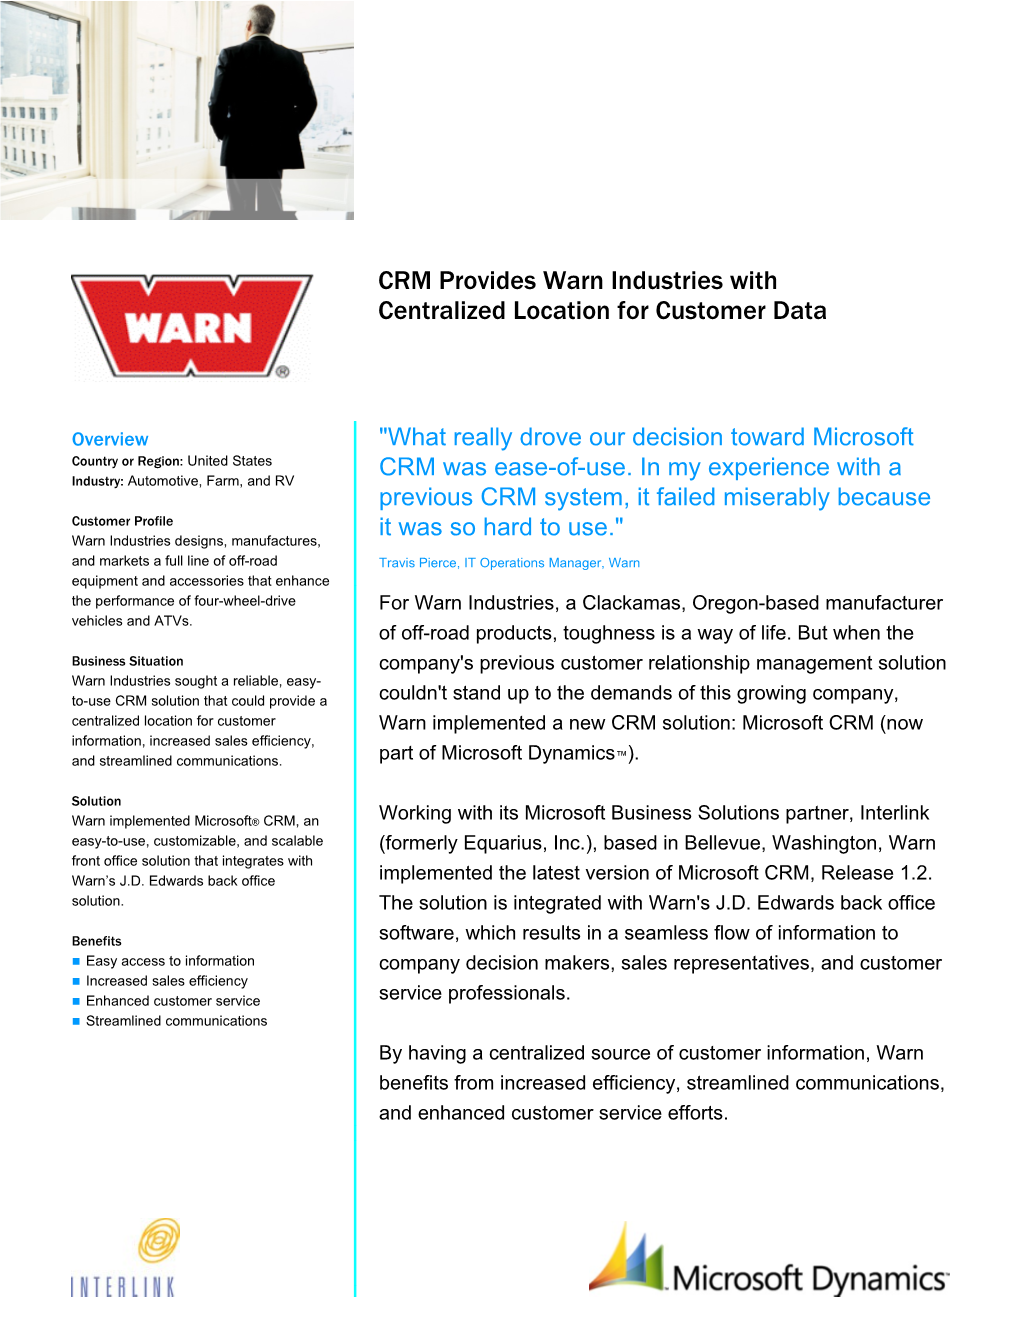 CRM Provides Warn Industries with Centralized Location for Customer Data